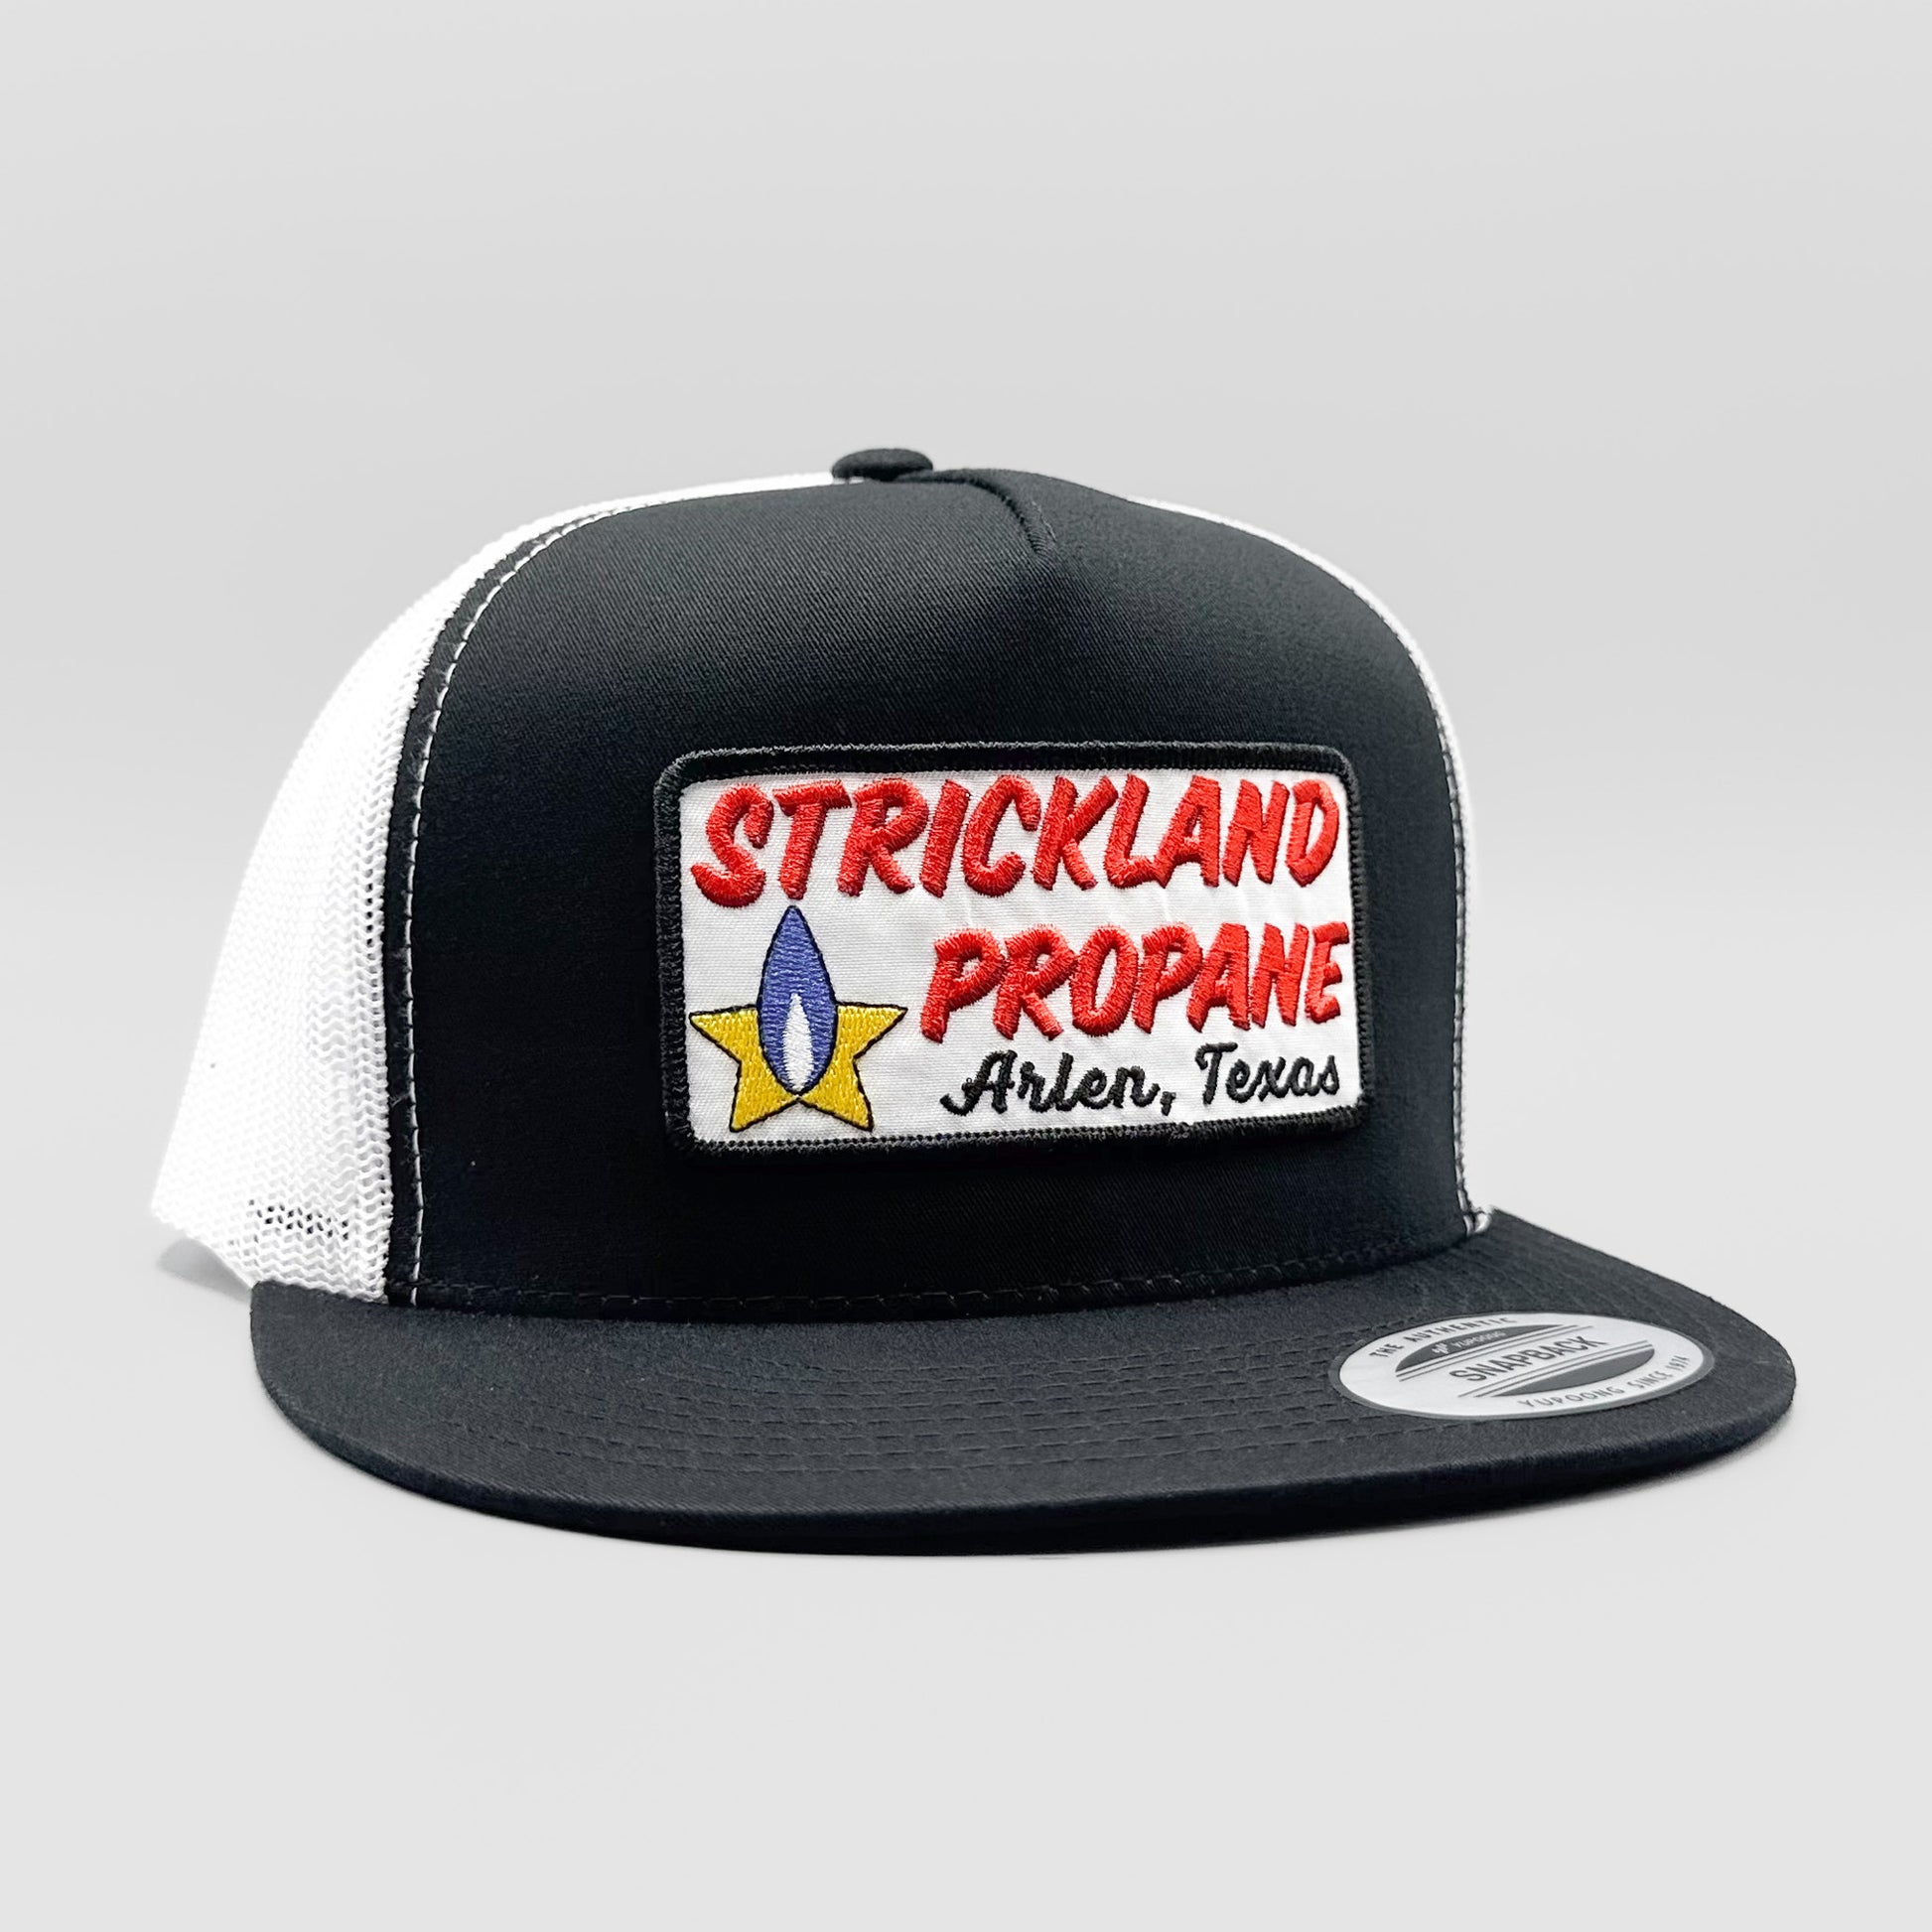 Strickland Propane King of the Hill Trucker Hat – Vintage Truckers